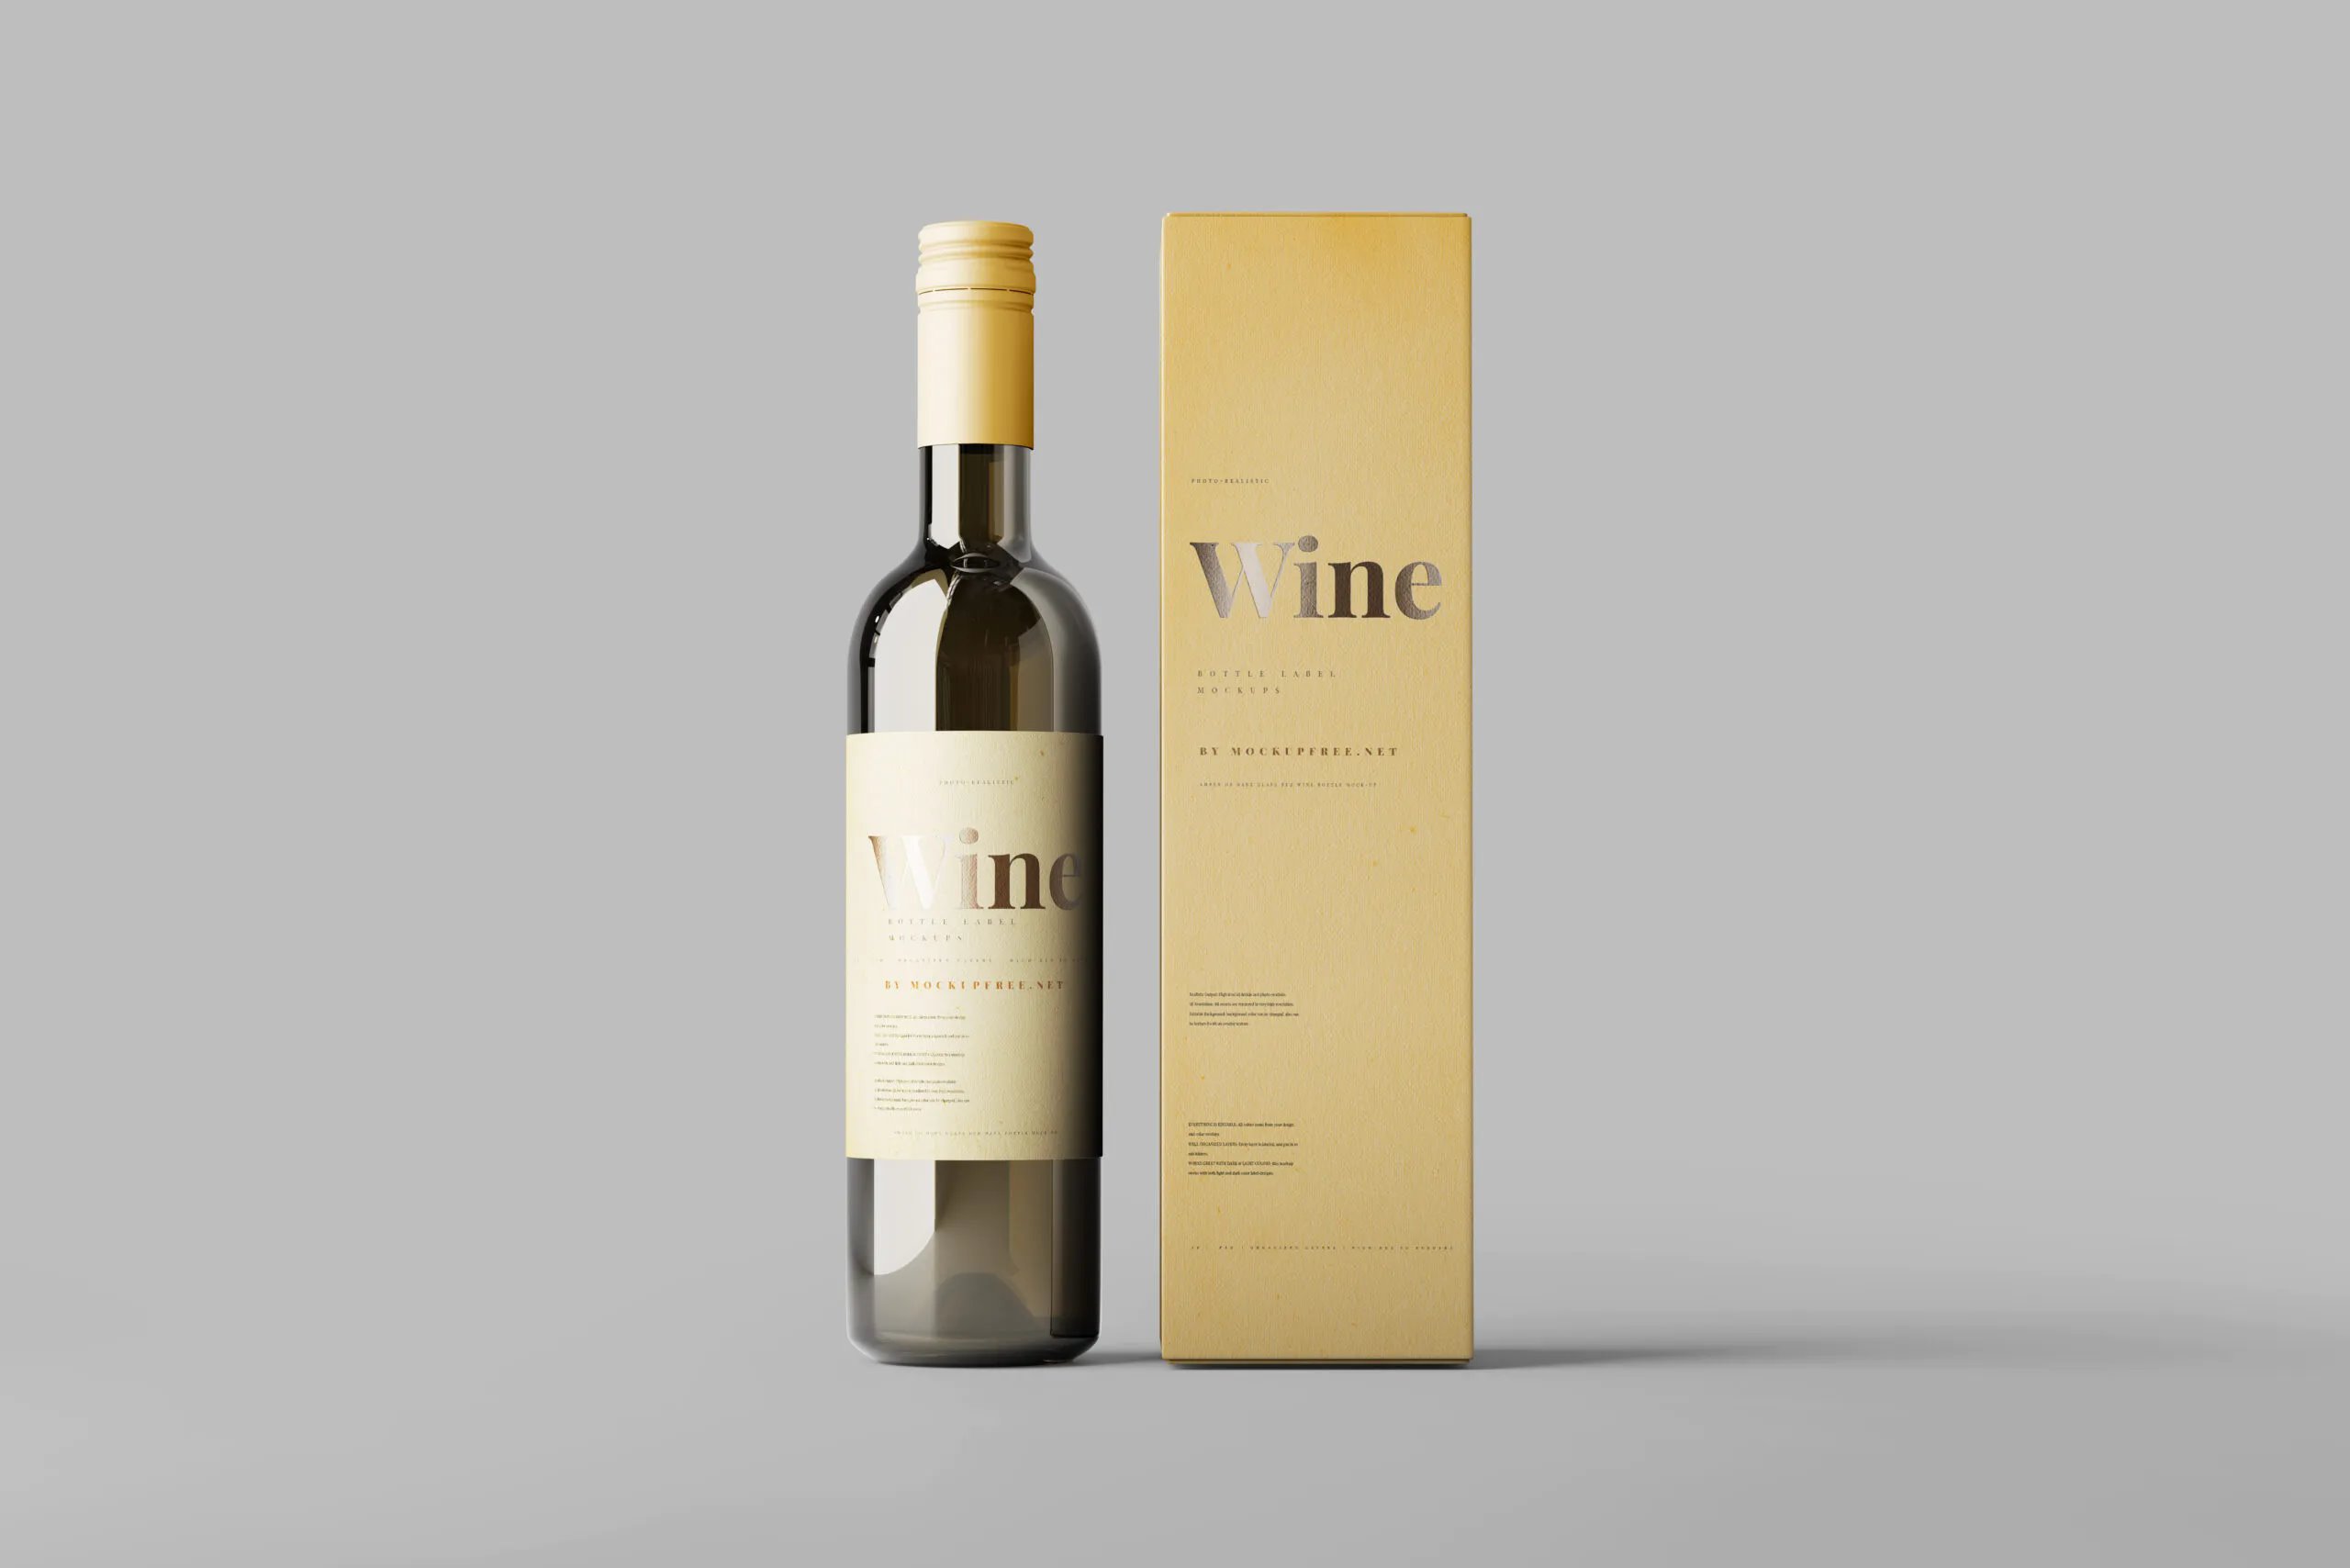 5 Wine Bottle Mockup with Box in Various Visions FREE PSD